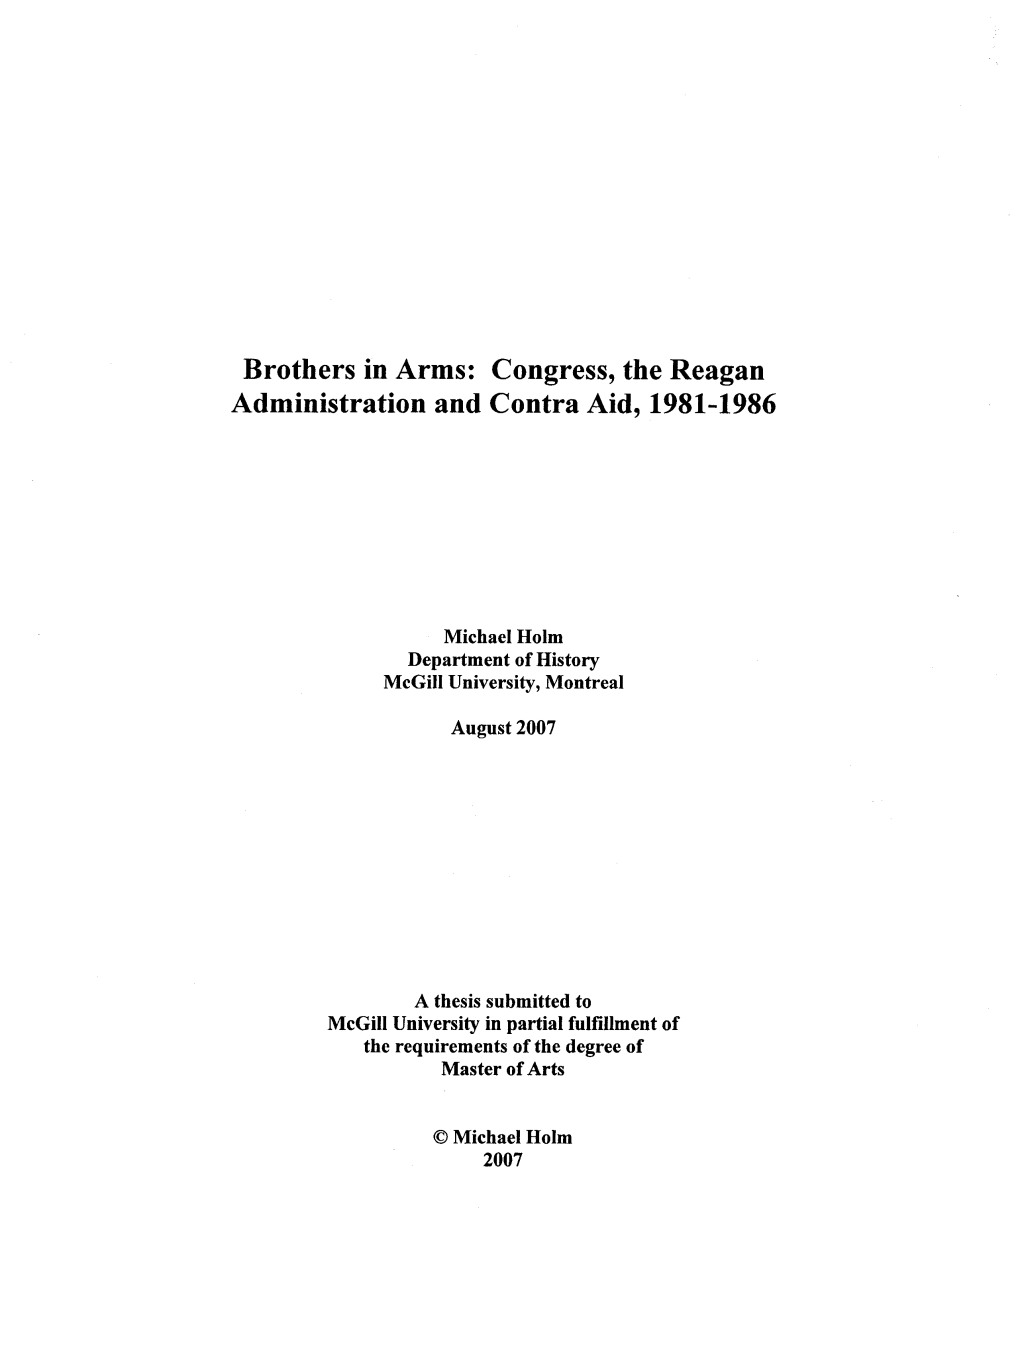 Brothers in Arms: Congress, the Reagan Administration and Contra Aid, 1981-1986